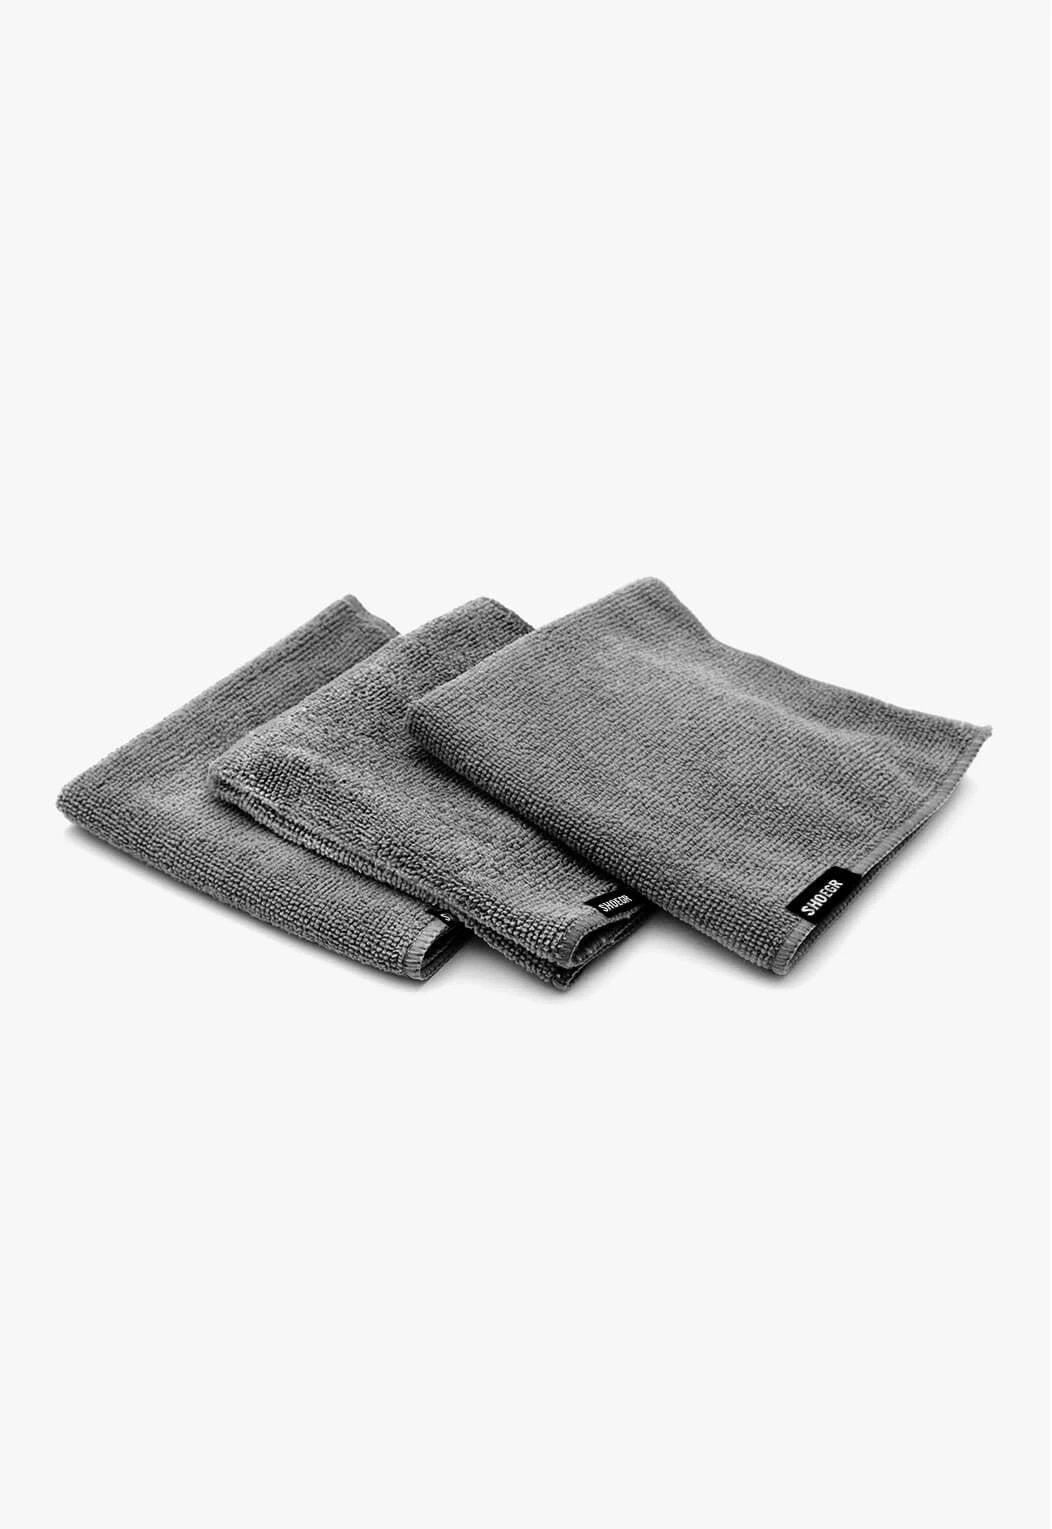 microfiber towel for shoe cleaning sneaker high quality